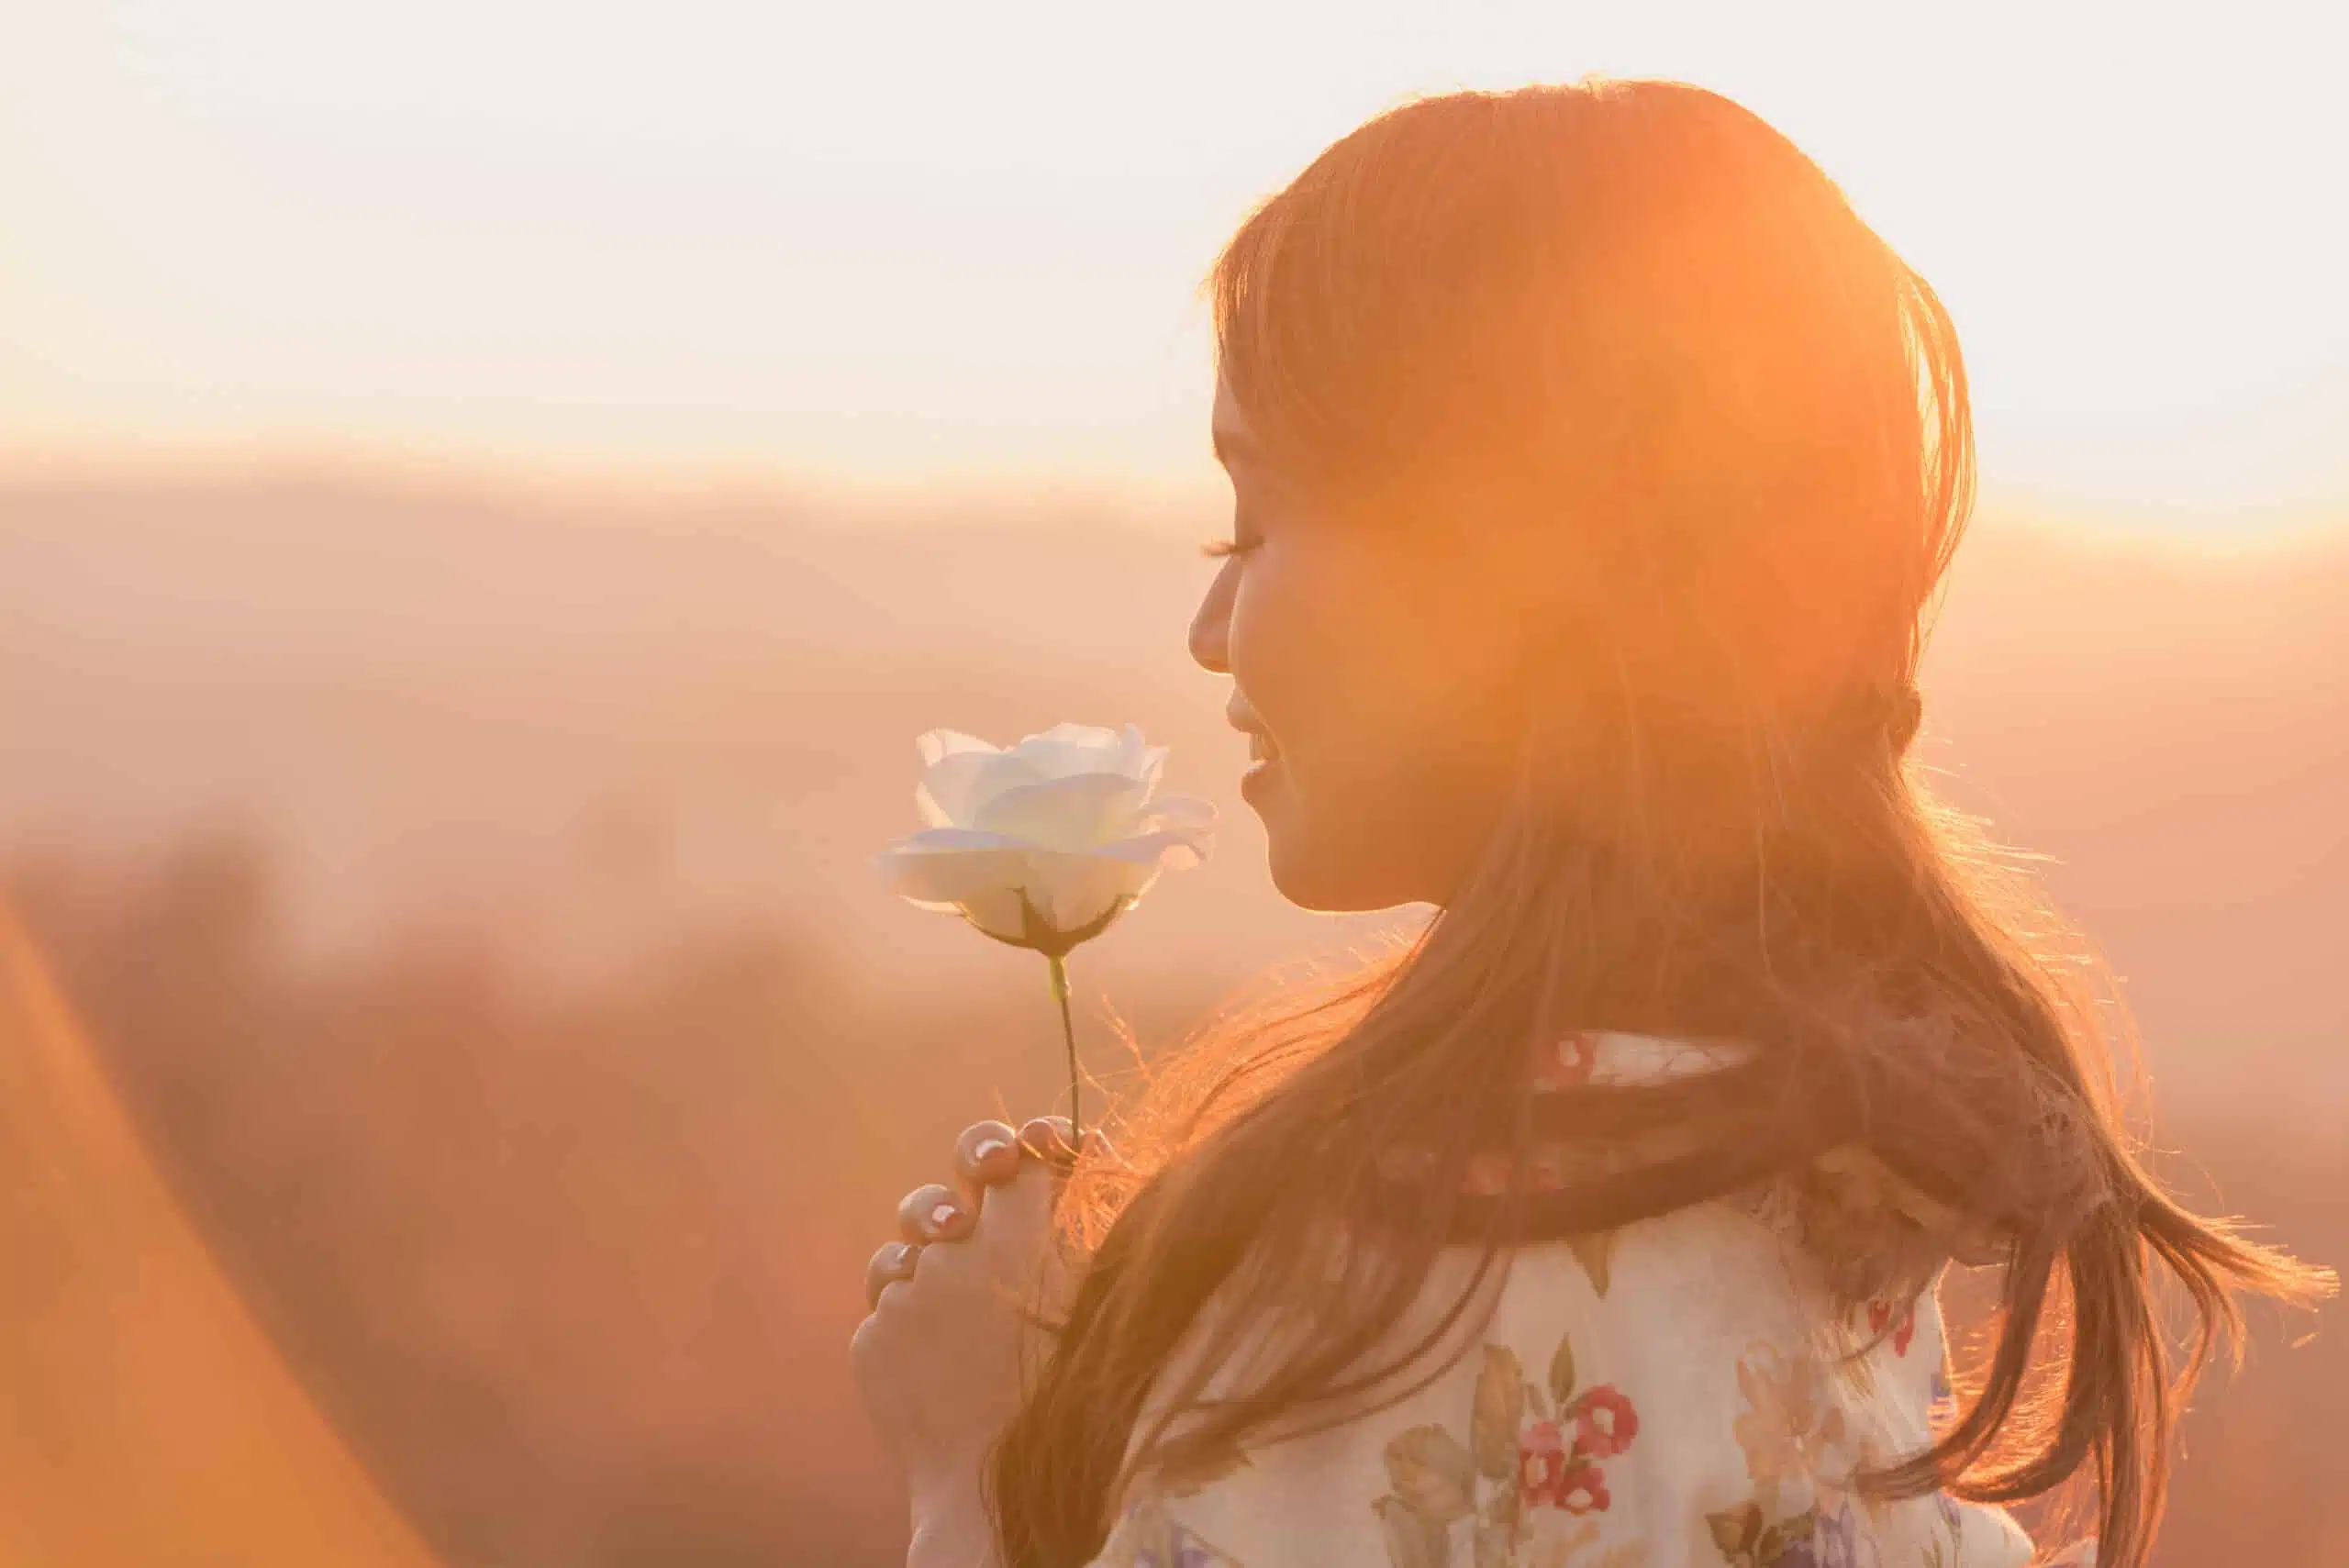 Japanese lady in a kimono holding a white stem rose at sunrise.